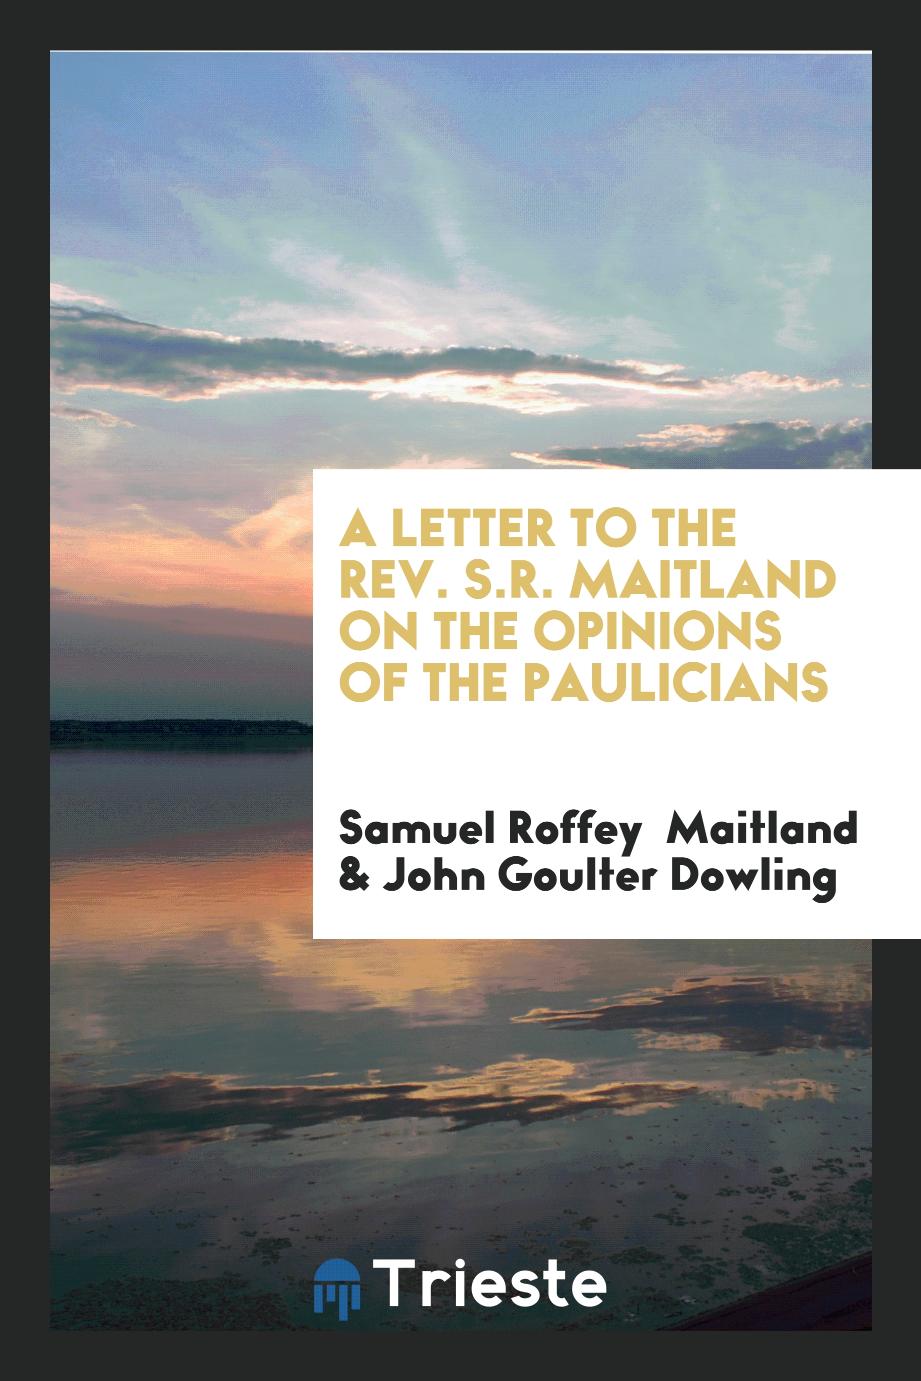 A letter to the rev. S.R. Maitland on the opinions of the Paulicians